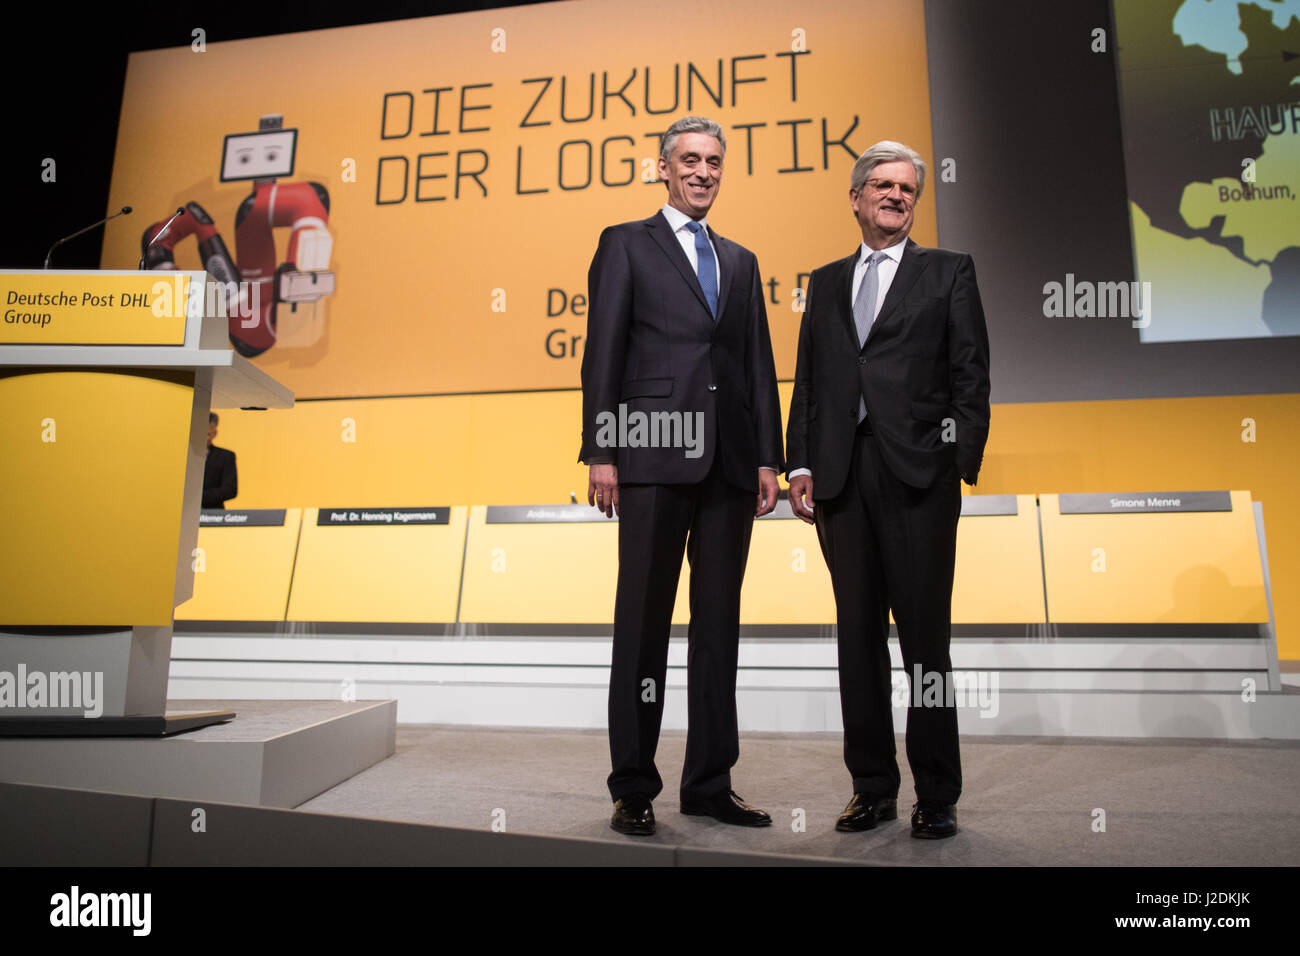 Bochum, Germany. 28th Apr, 2017. Frank Appel (R), the CEO of Deutsche Post AG, with chairman of the board of directors Wulf von Schimmelmann at the company's general meeting in Bochum, Germany, 28 April 2017. Appel presented the company's financial report. Photo: Marcel Kusch/dpa/Alamy Live News Stock Photo